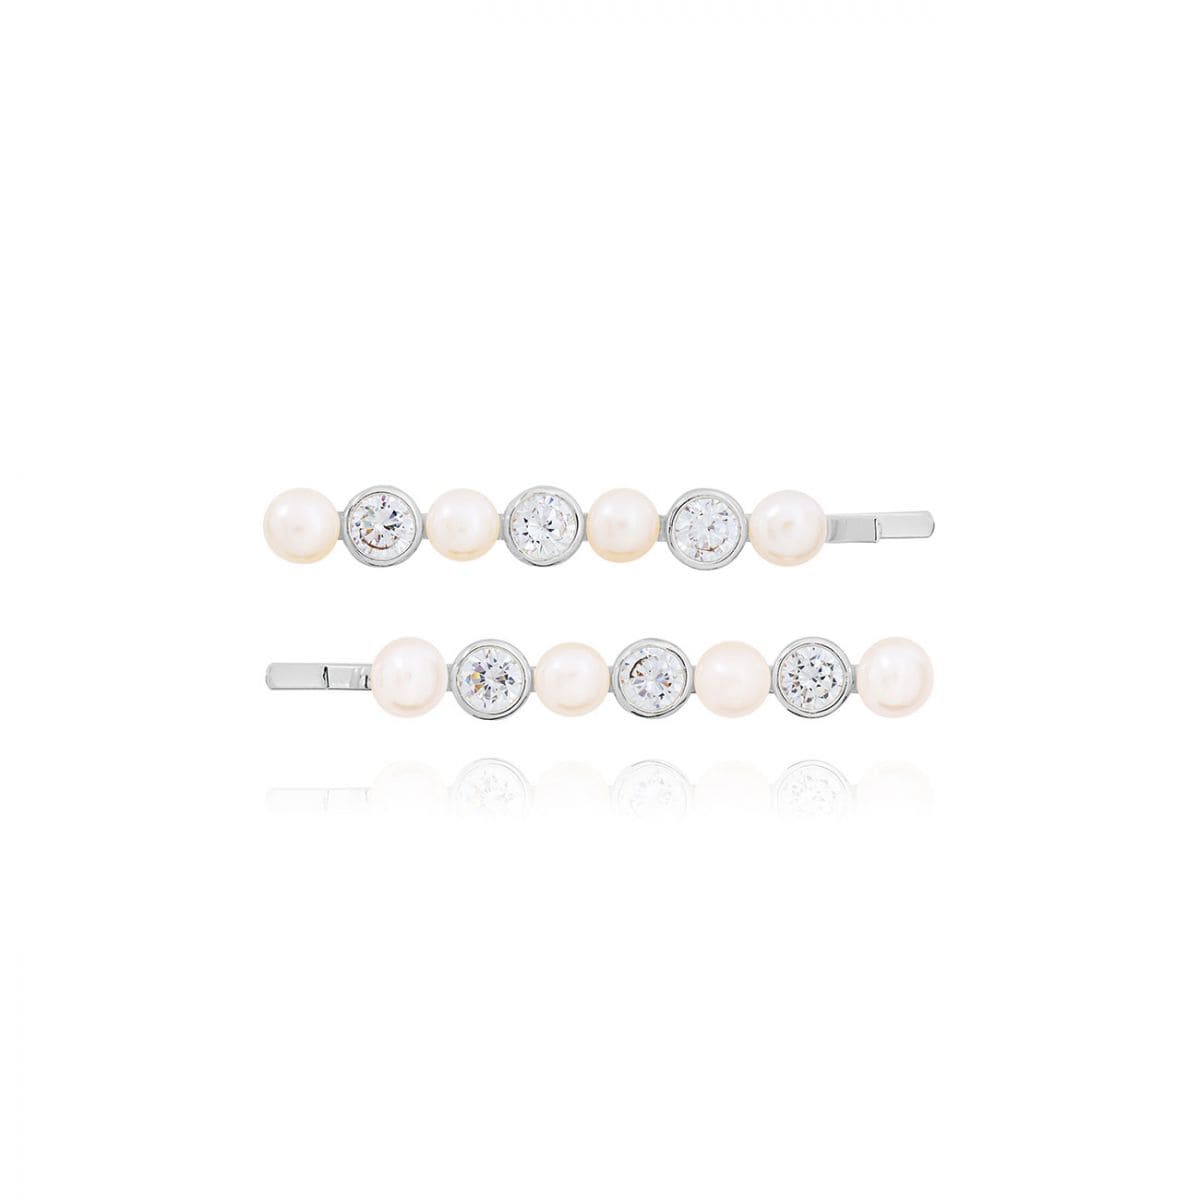 Joma Jewellery Necklace Joma Jewellery Happily Ever After Bridal Boxed Hair Slides - Pearl And C/Z